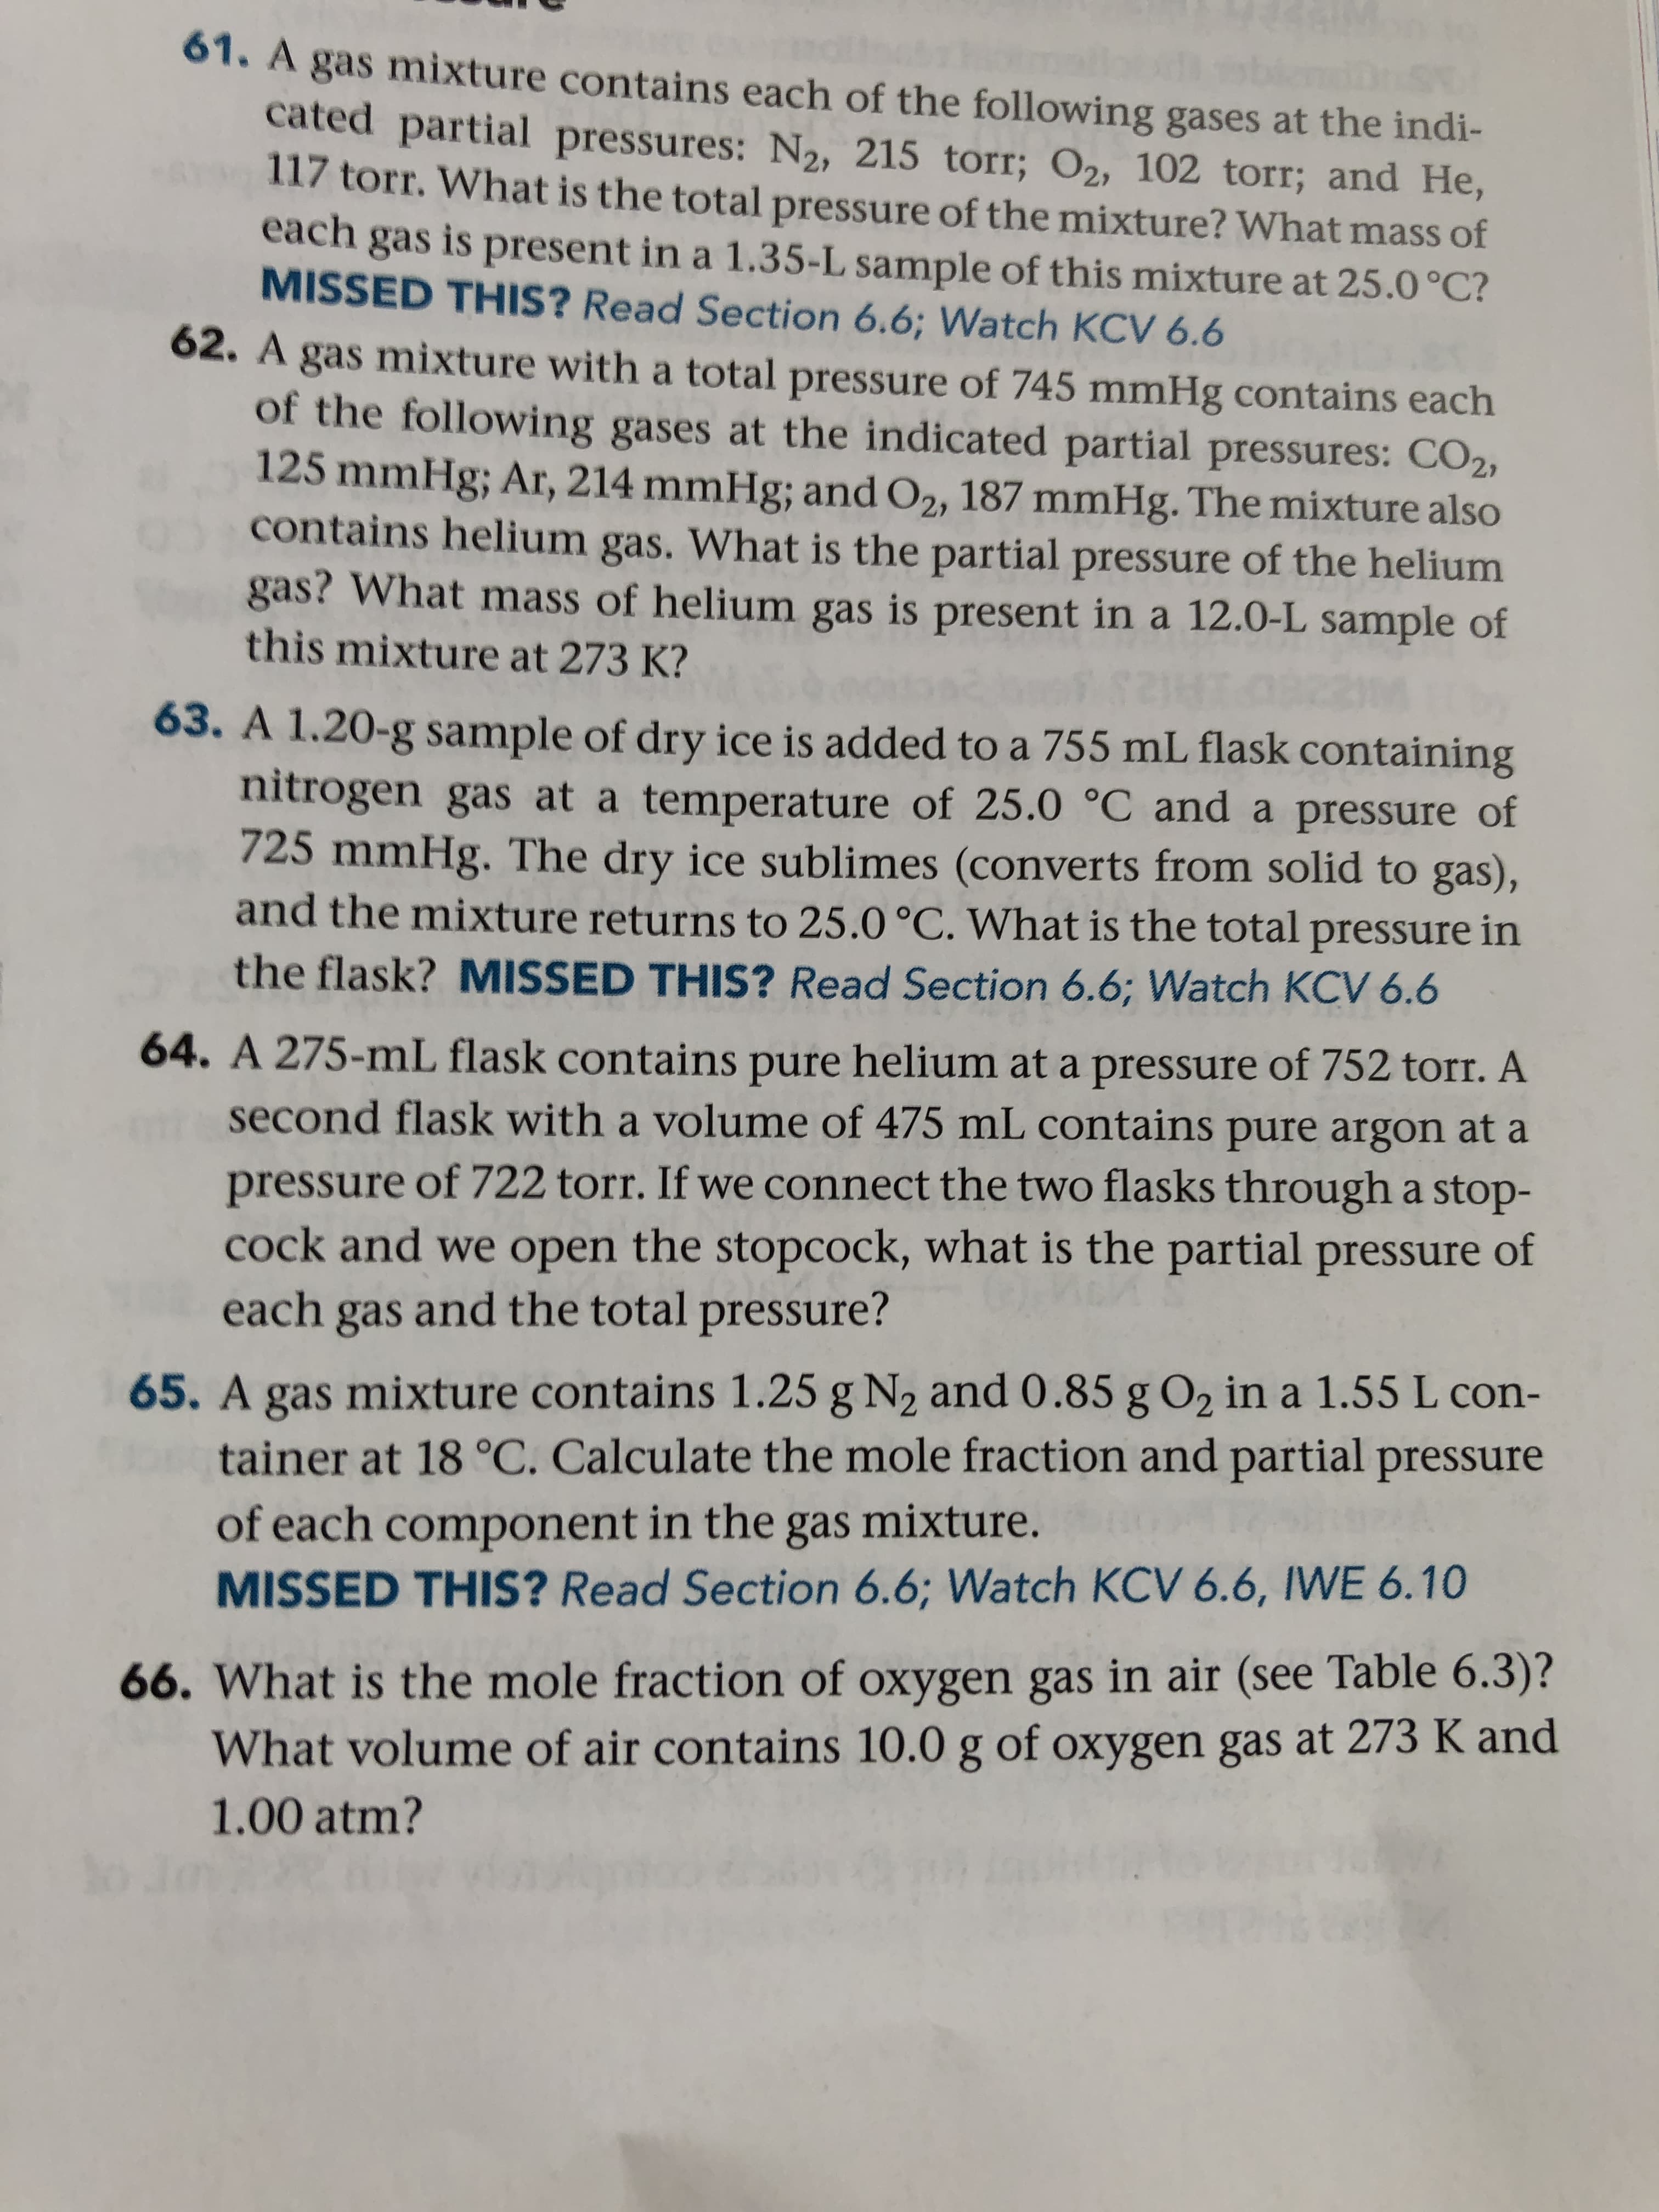 A gas mixture contains 1.25 g N2 and 0.85 g O2 in a 1.55 L con-
tainer at 18 °C. Calculate the mole fraction and partial pressure
of each component in the gas mixture.
